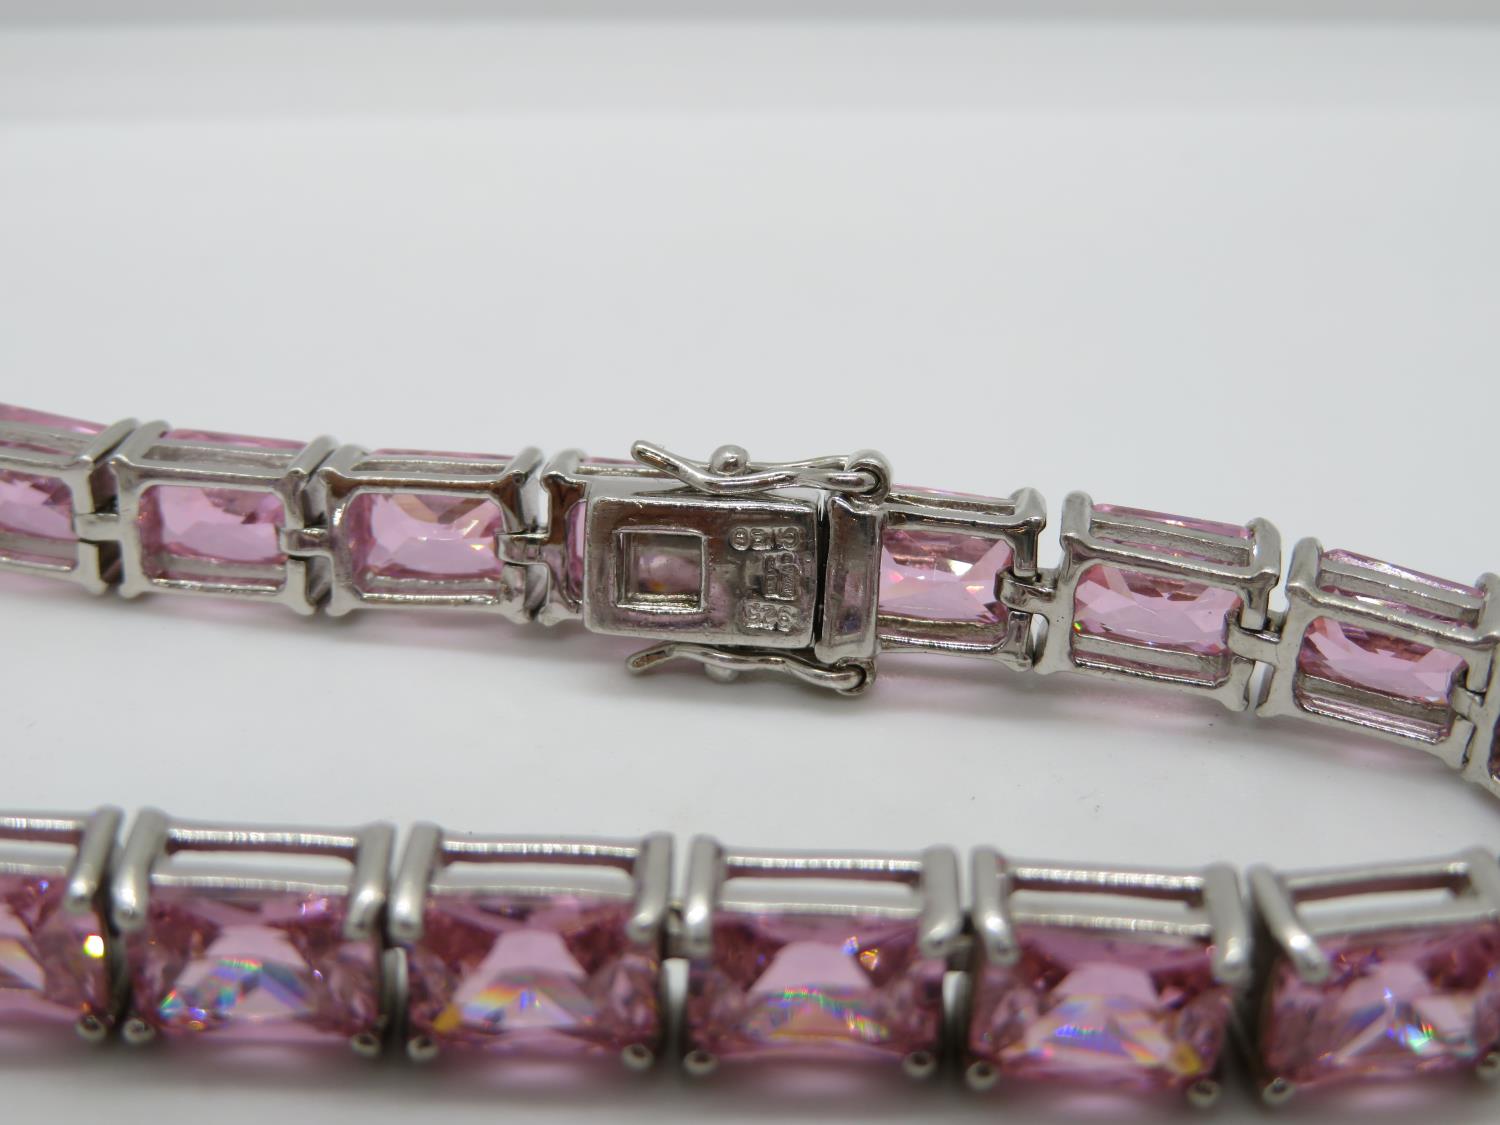 HM silver bracelet set with French cut pink Zirconia stones 7.25" 26.5g - Image 2 of 2